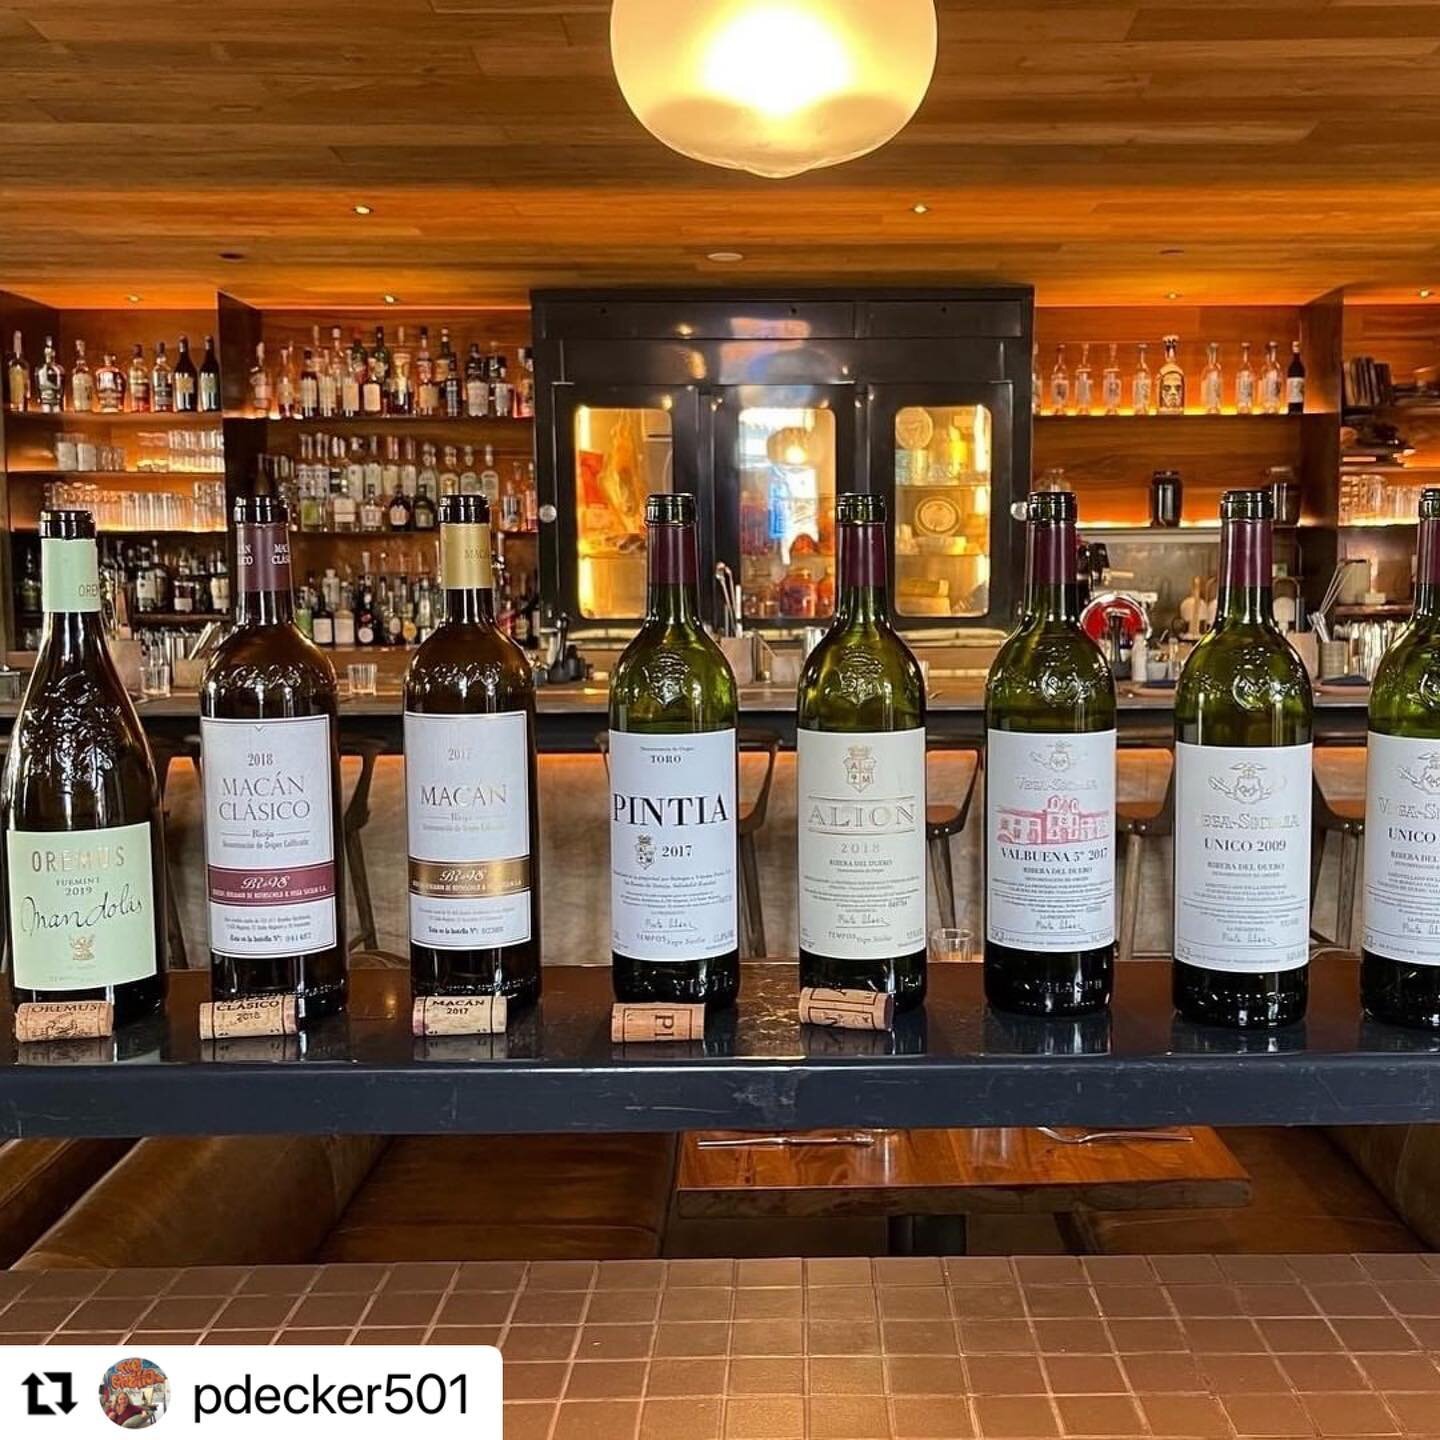 #Repost @pdecker501 with @make_repost
・・・
The legend incarnate, Vega Sicilia of Spain brought their stunning wines to Los Angeles, with CEO Pablo &Agrave;lvarez leading the charge. One of the world's great wineries, and their flagship wine, Unico, is